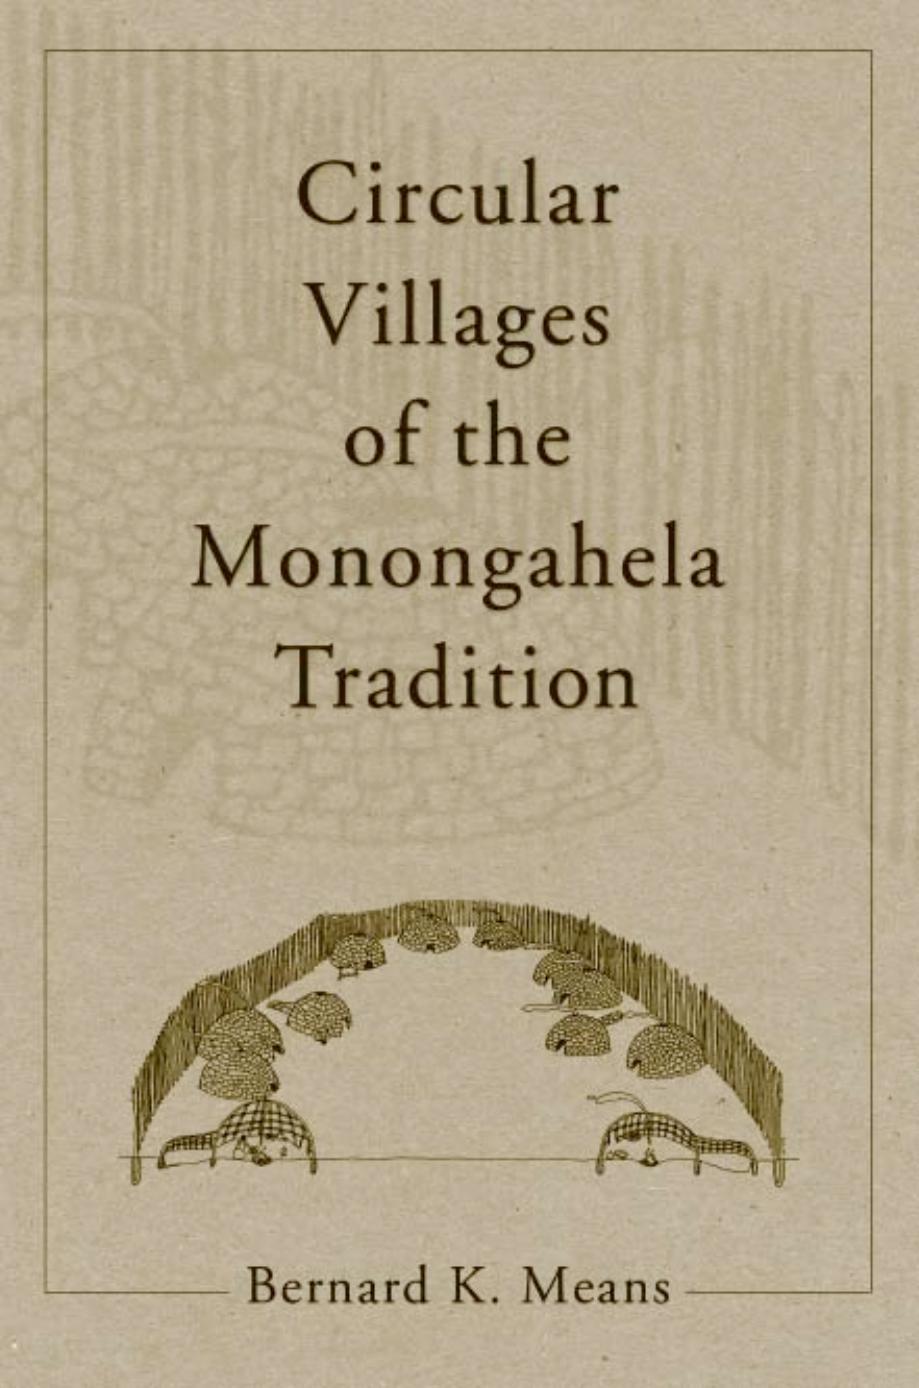 Circular villages of the Monongahela tradition by Bernard K. Means